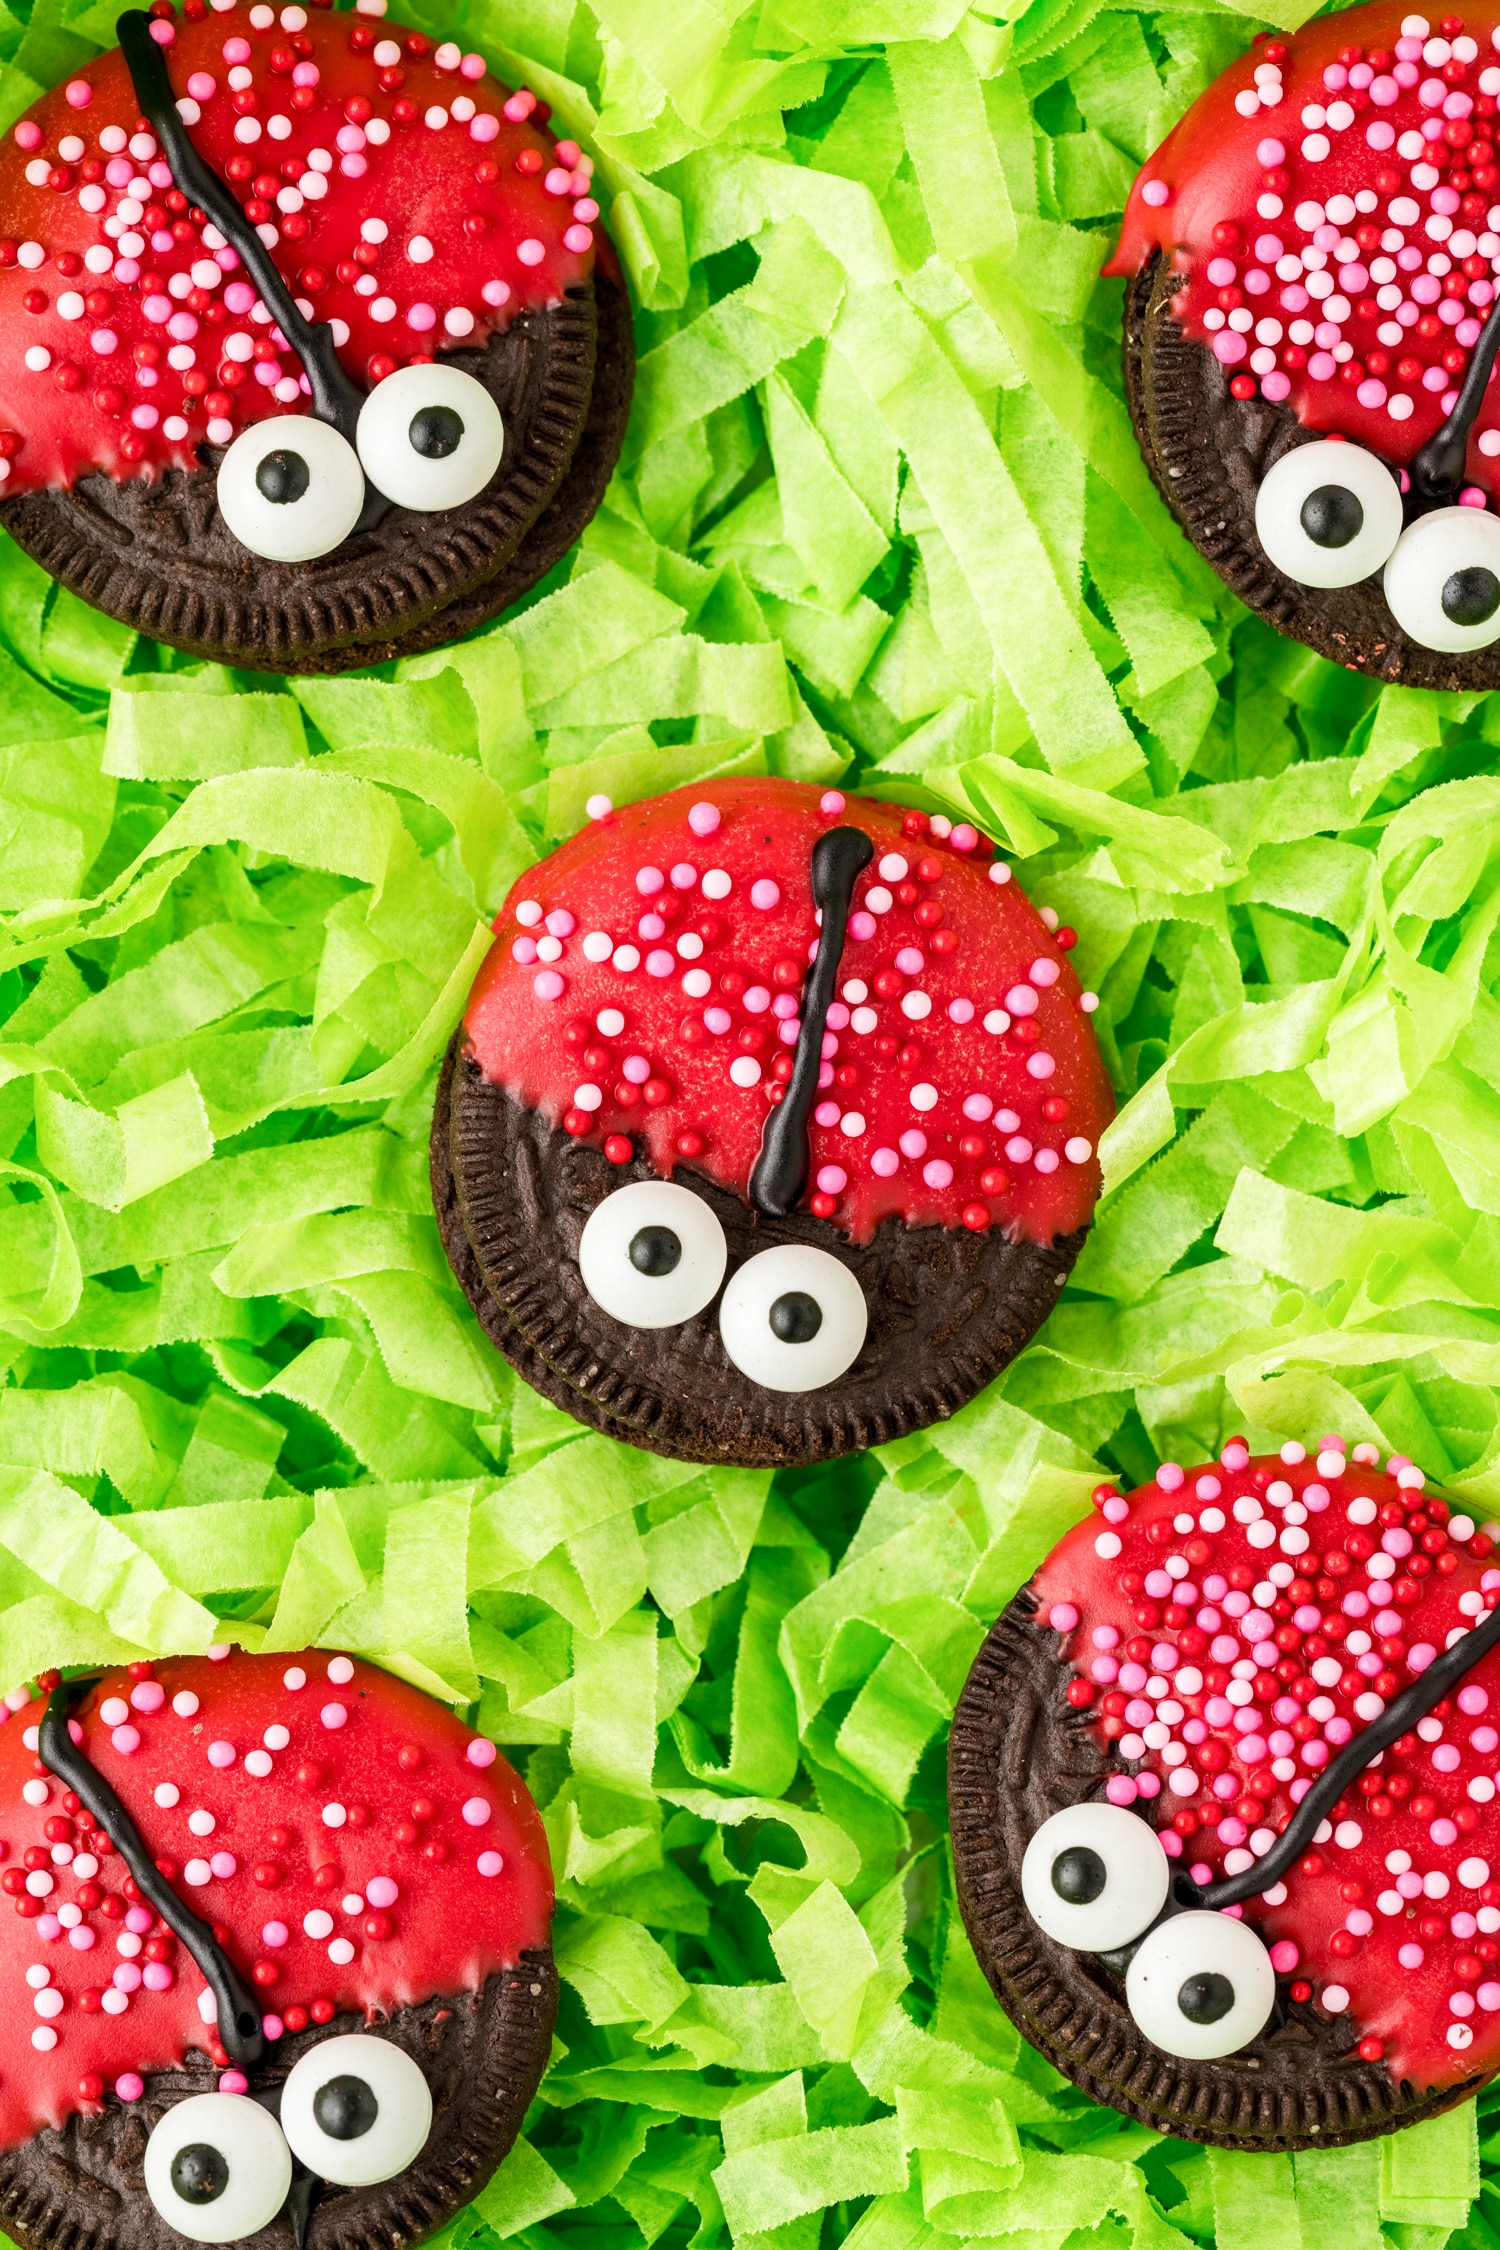 Lady Bug Oreos arranged on green crinkle paper